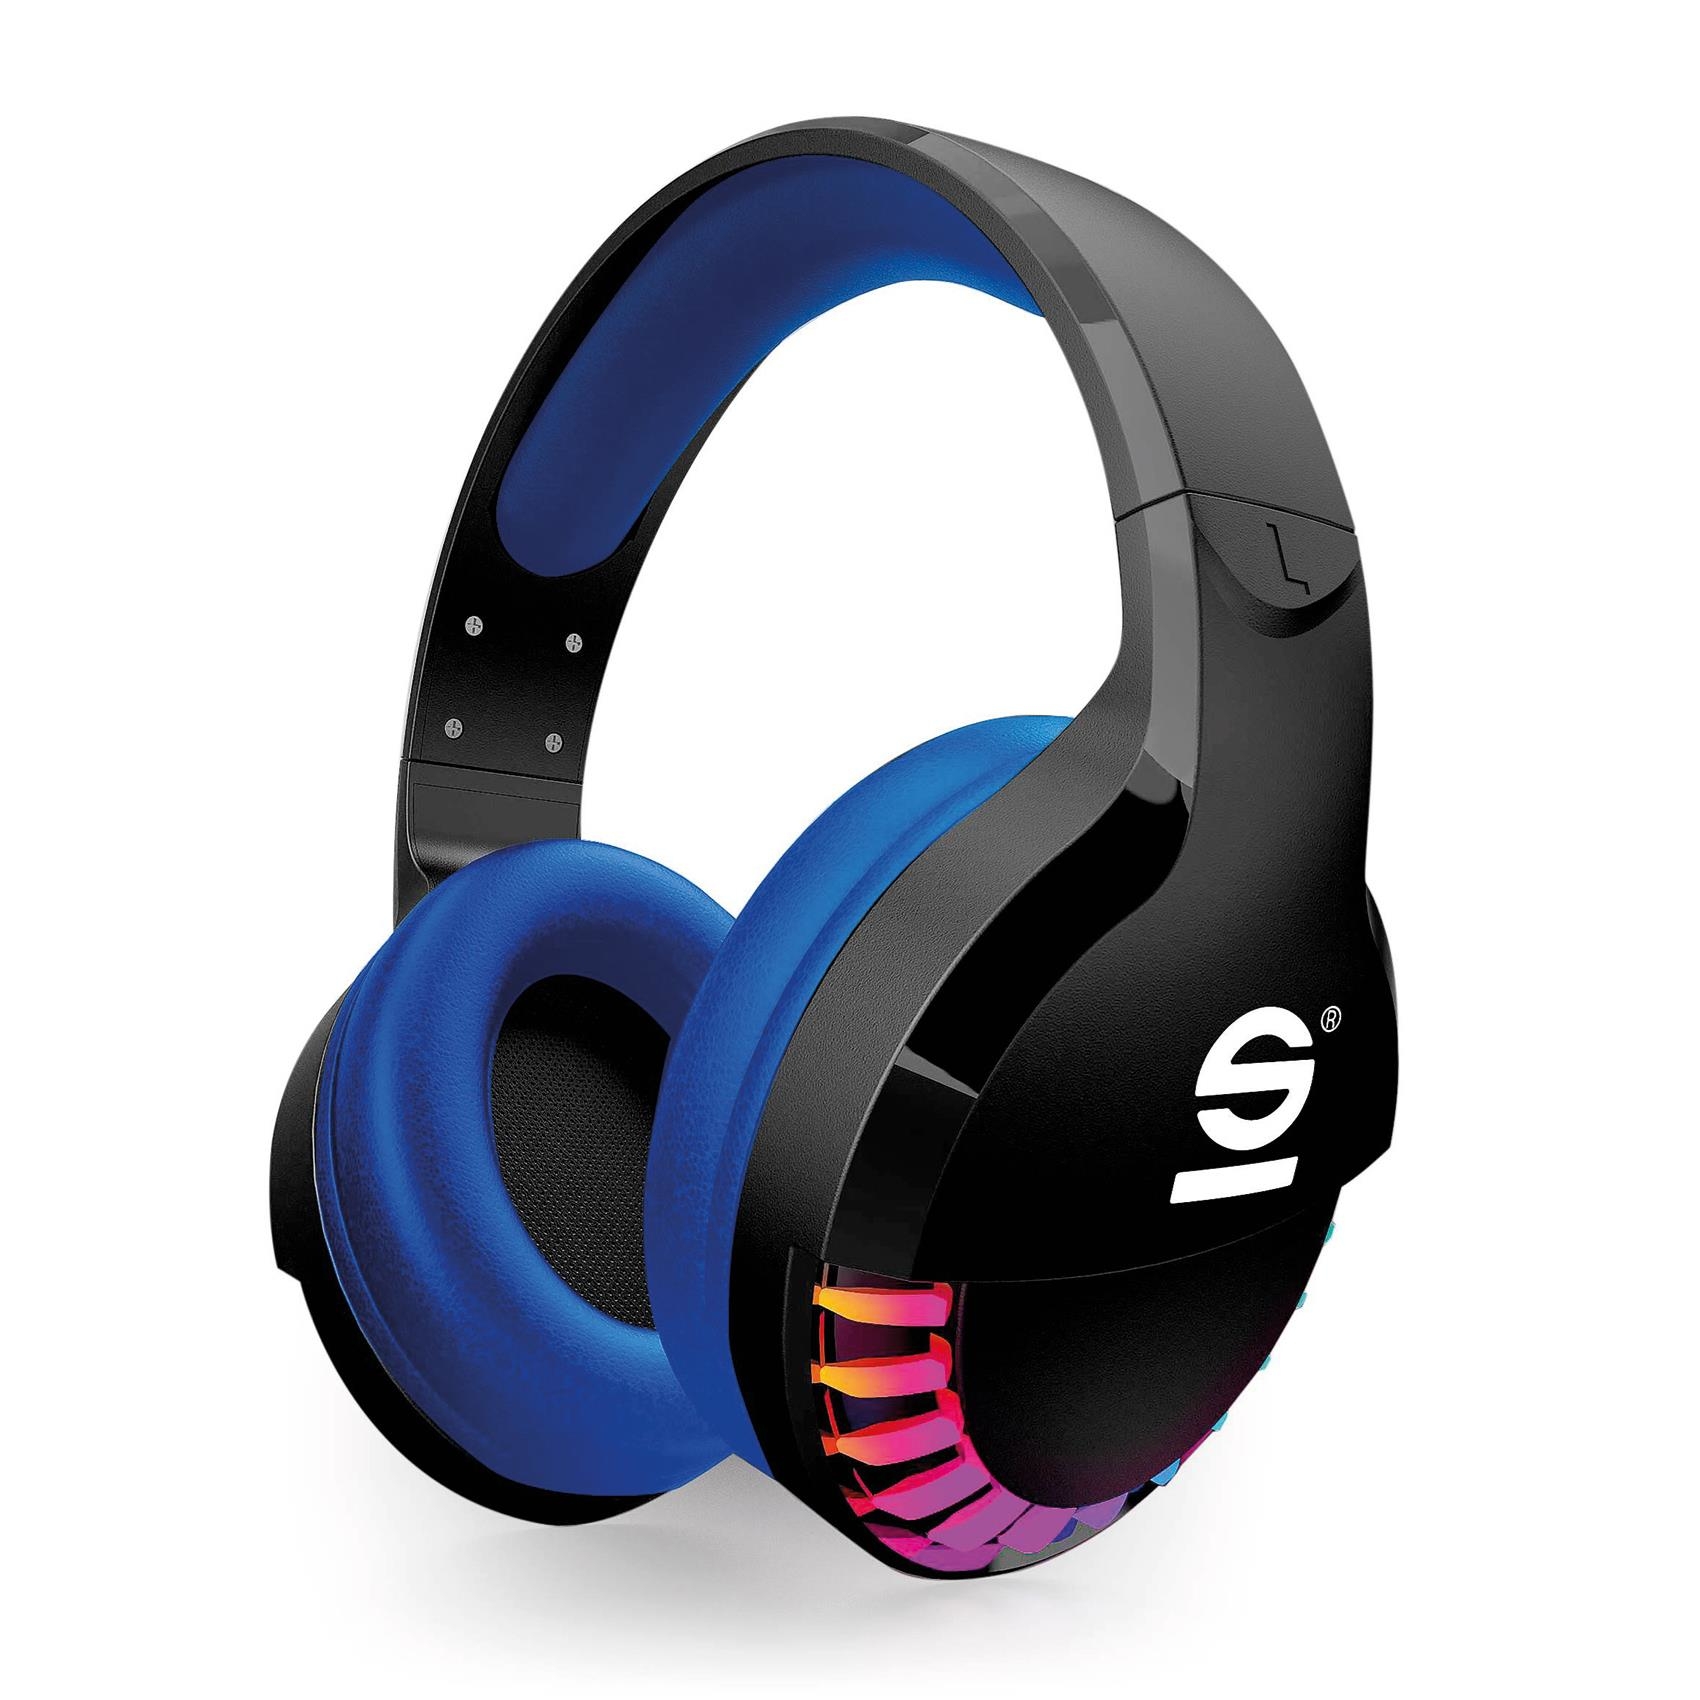 Celly 543858 Celly Cuffie Wireless Speed Linea Sparco Cuffie Gaming Over Ear 